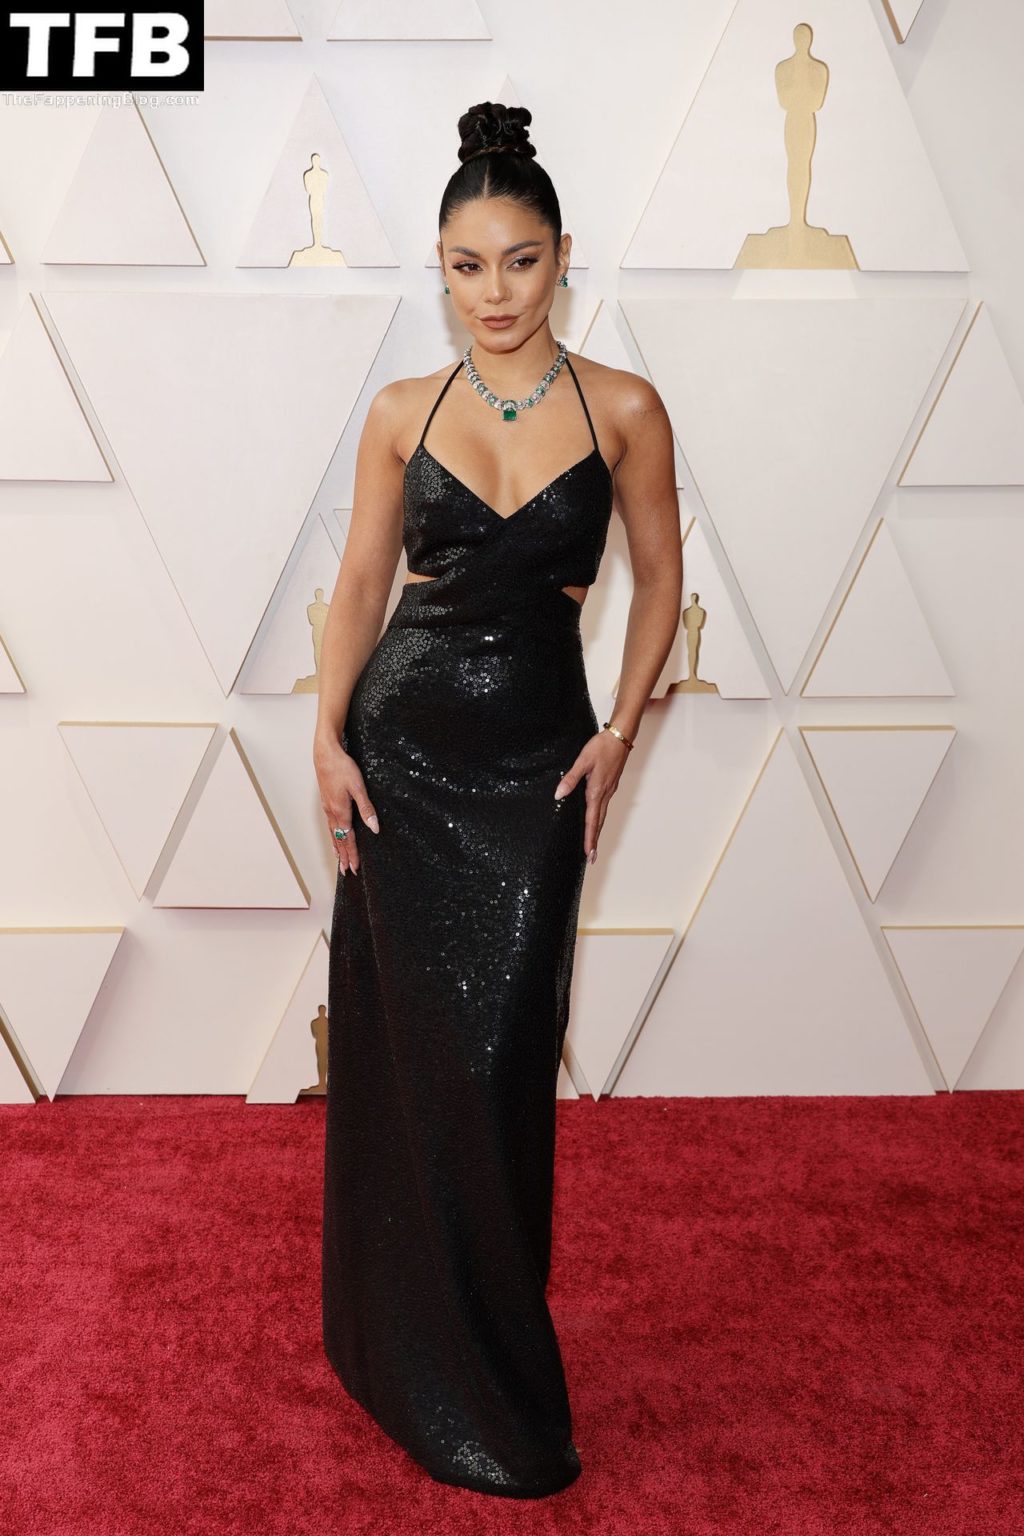 Vanessa Hudgens Sexy The Fappening Blog 35 4 1024x1536 - Vanessa Hudgens Poses on the Red Carpet at the 94th Annual Academy Awards (83 Photos)